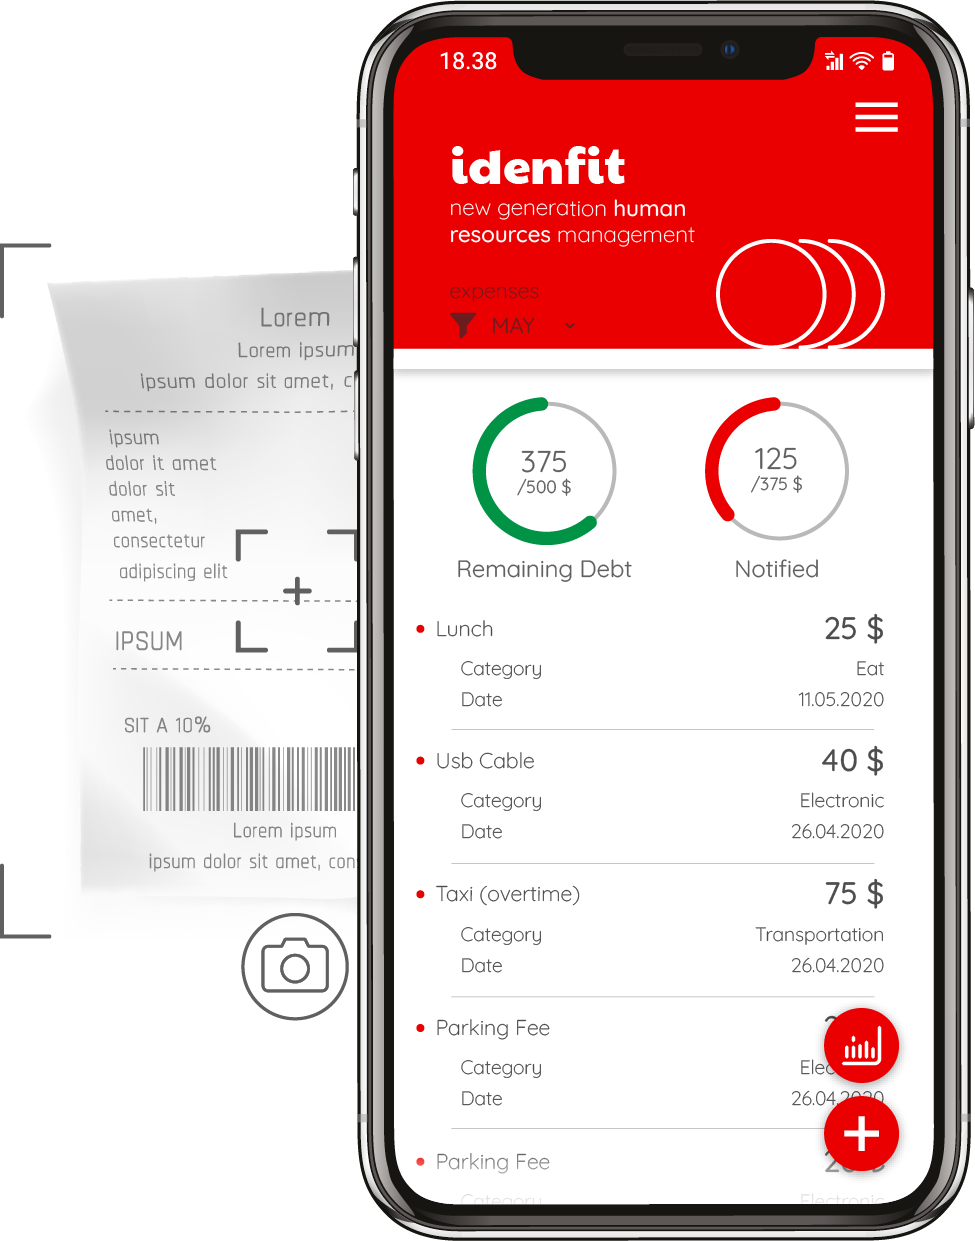 With Idenfit, tracking employee expenses is just one click away.